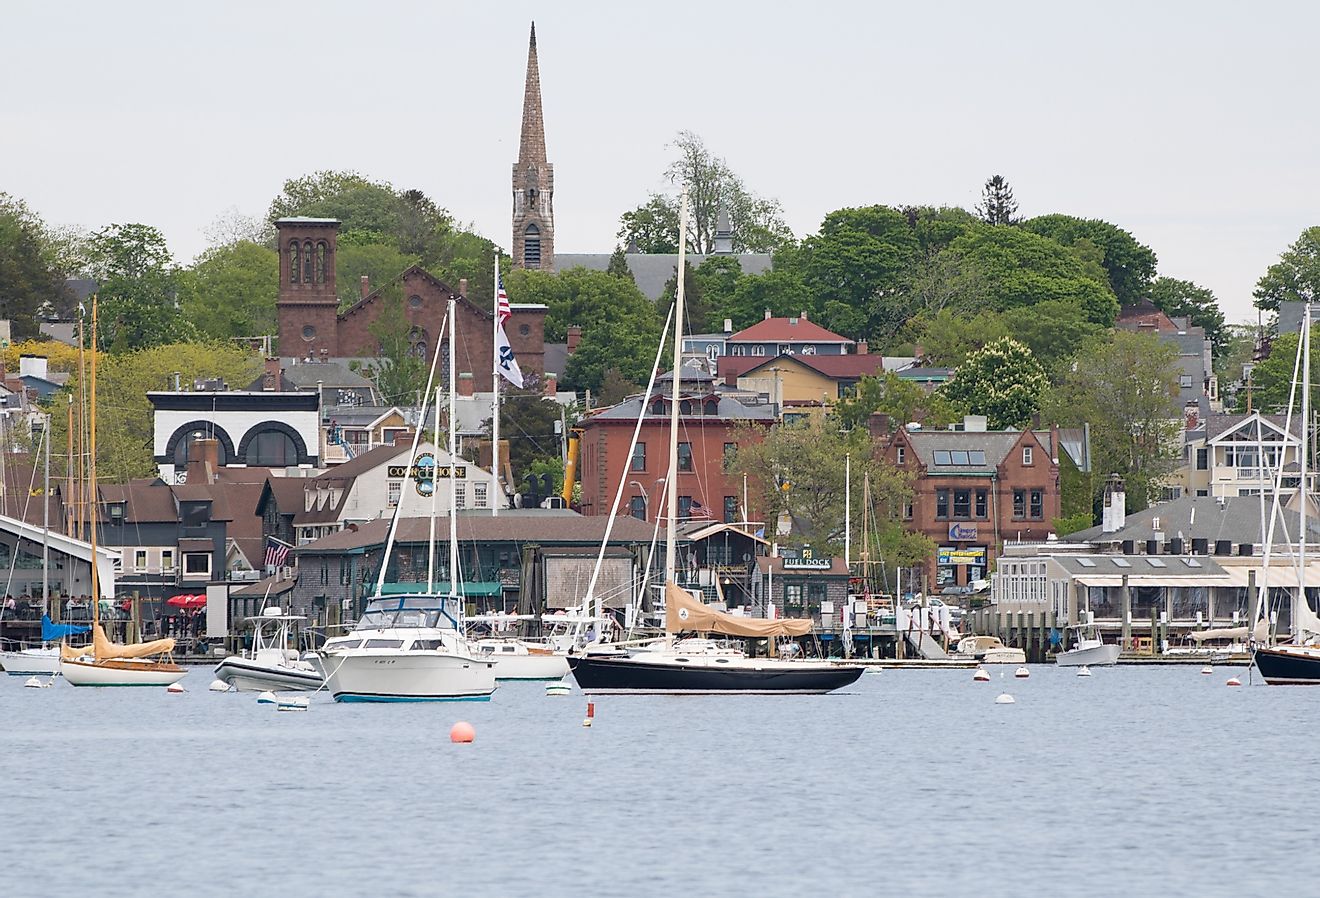 Newport Harbor and the historic St. Mary's Church in Newport, Rhode Island.